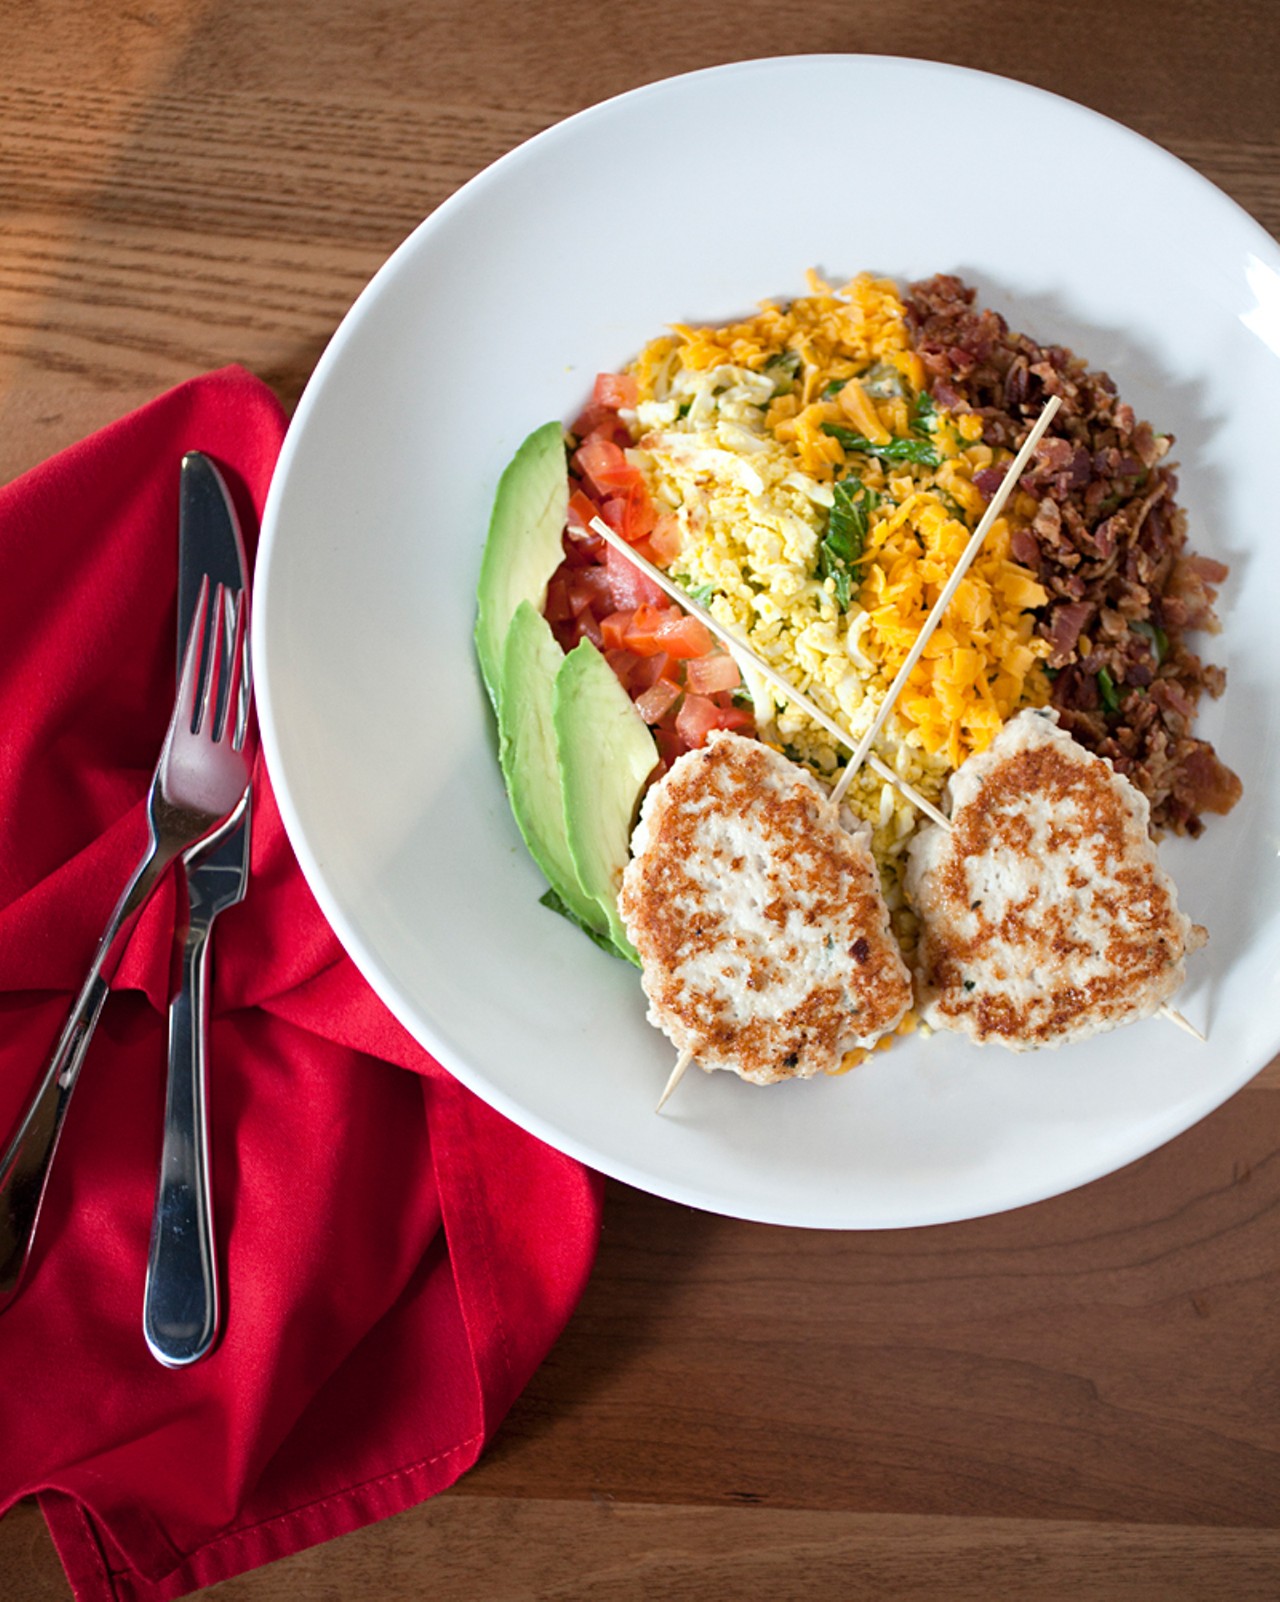 The "Turkey Burger" cobb salad is served with grilled natural turkey, organic romaine lettuce, smoked bacon, avocado, tomatoes, cheddar and egg, with a black peppercorn ranch dressing.